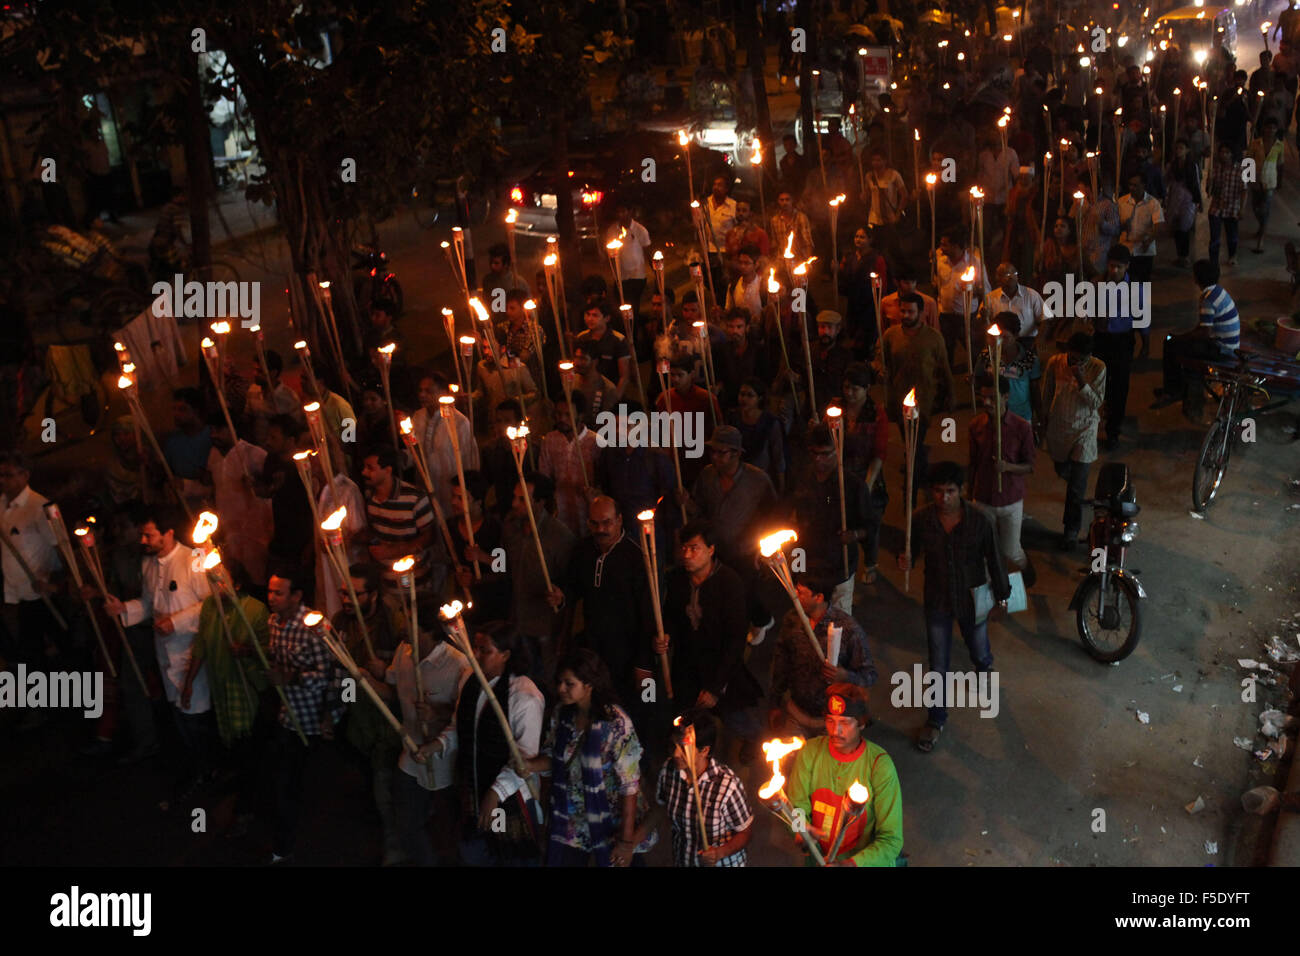 Dhaka, Bangladesh. 2nd Nov, 2015. DHAKA, BANGLADESH 02nd November : Cultural activists, writers and members of the Ganajagaran Mancha shout slogans as they attend a torch light procession protesting the killing and attacks on the publisher and bloggers in Dhaka on November 02, 2015.Ganajagaran Mancha has called for a half-day country-wide strike on 03 November demanding the arrest of the assailants of publishers. The publisher Faisal Arefin Dipan was stabbed to death in Dhaka on 31 October, hours after unidentified assailants knifed another publisher and two secular bloggers elsewhere in th Stock Photo